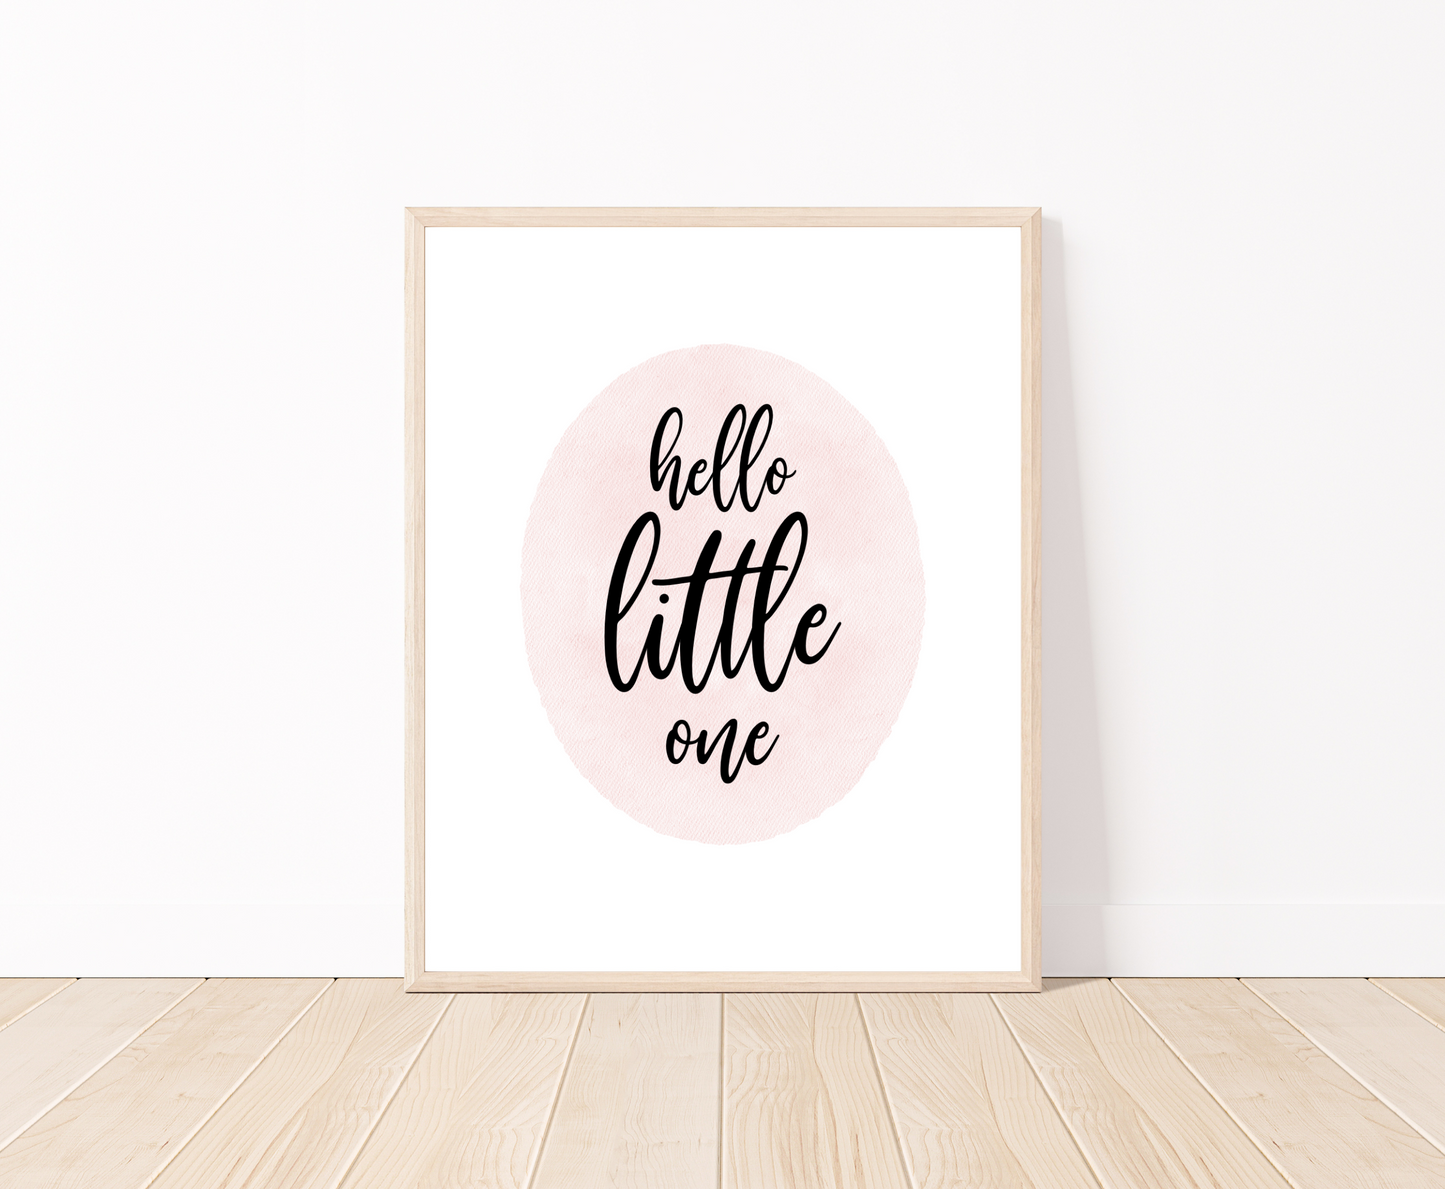 A digital print placed on a white wall and parquet flooring showing a pink oval shape that says “Hello little one”